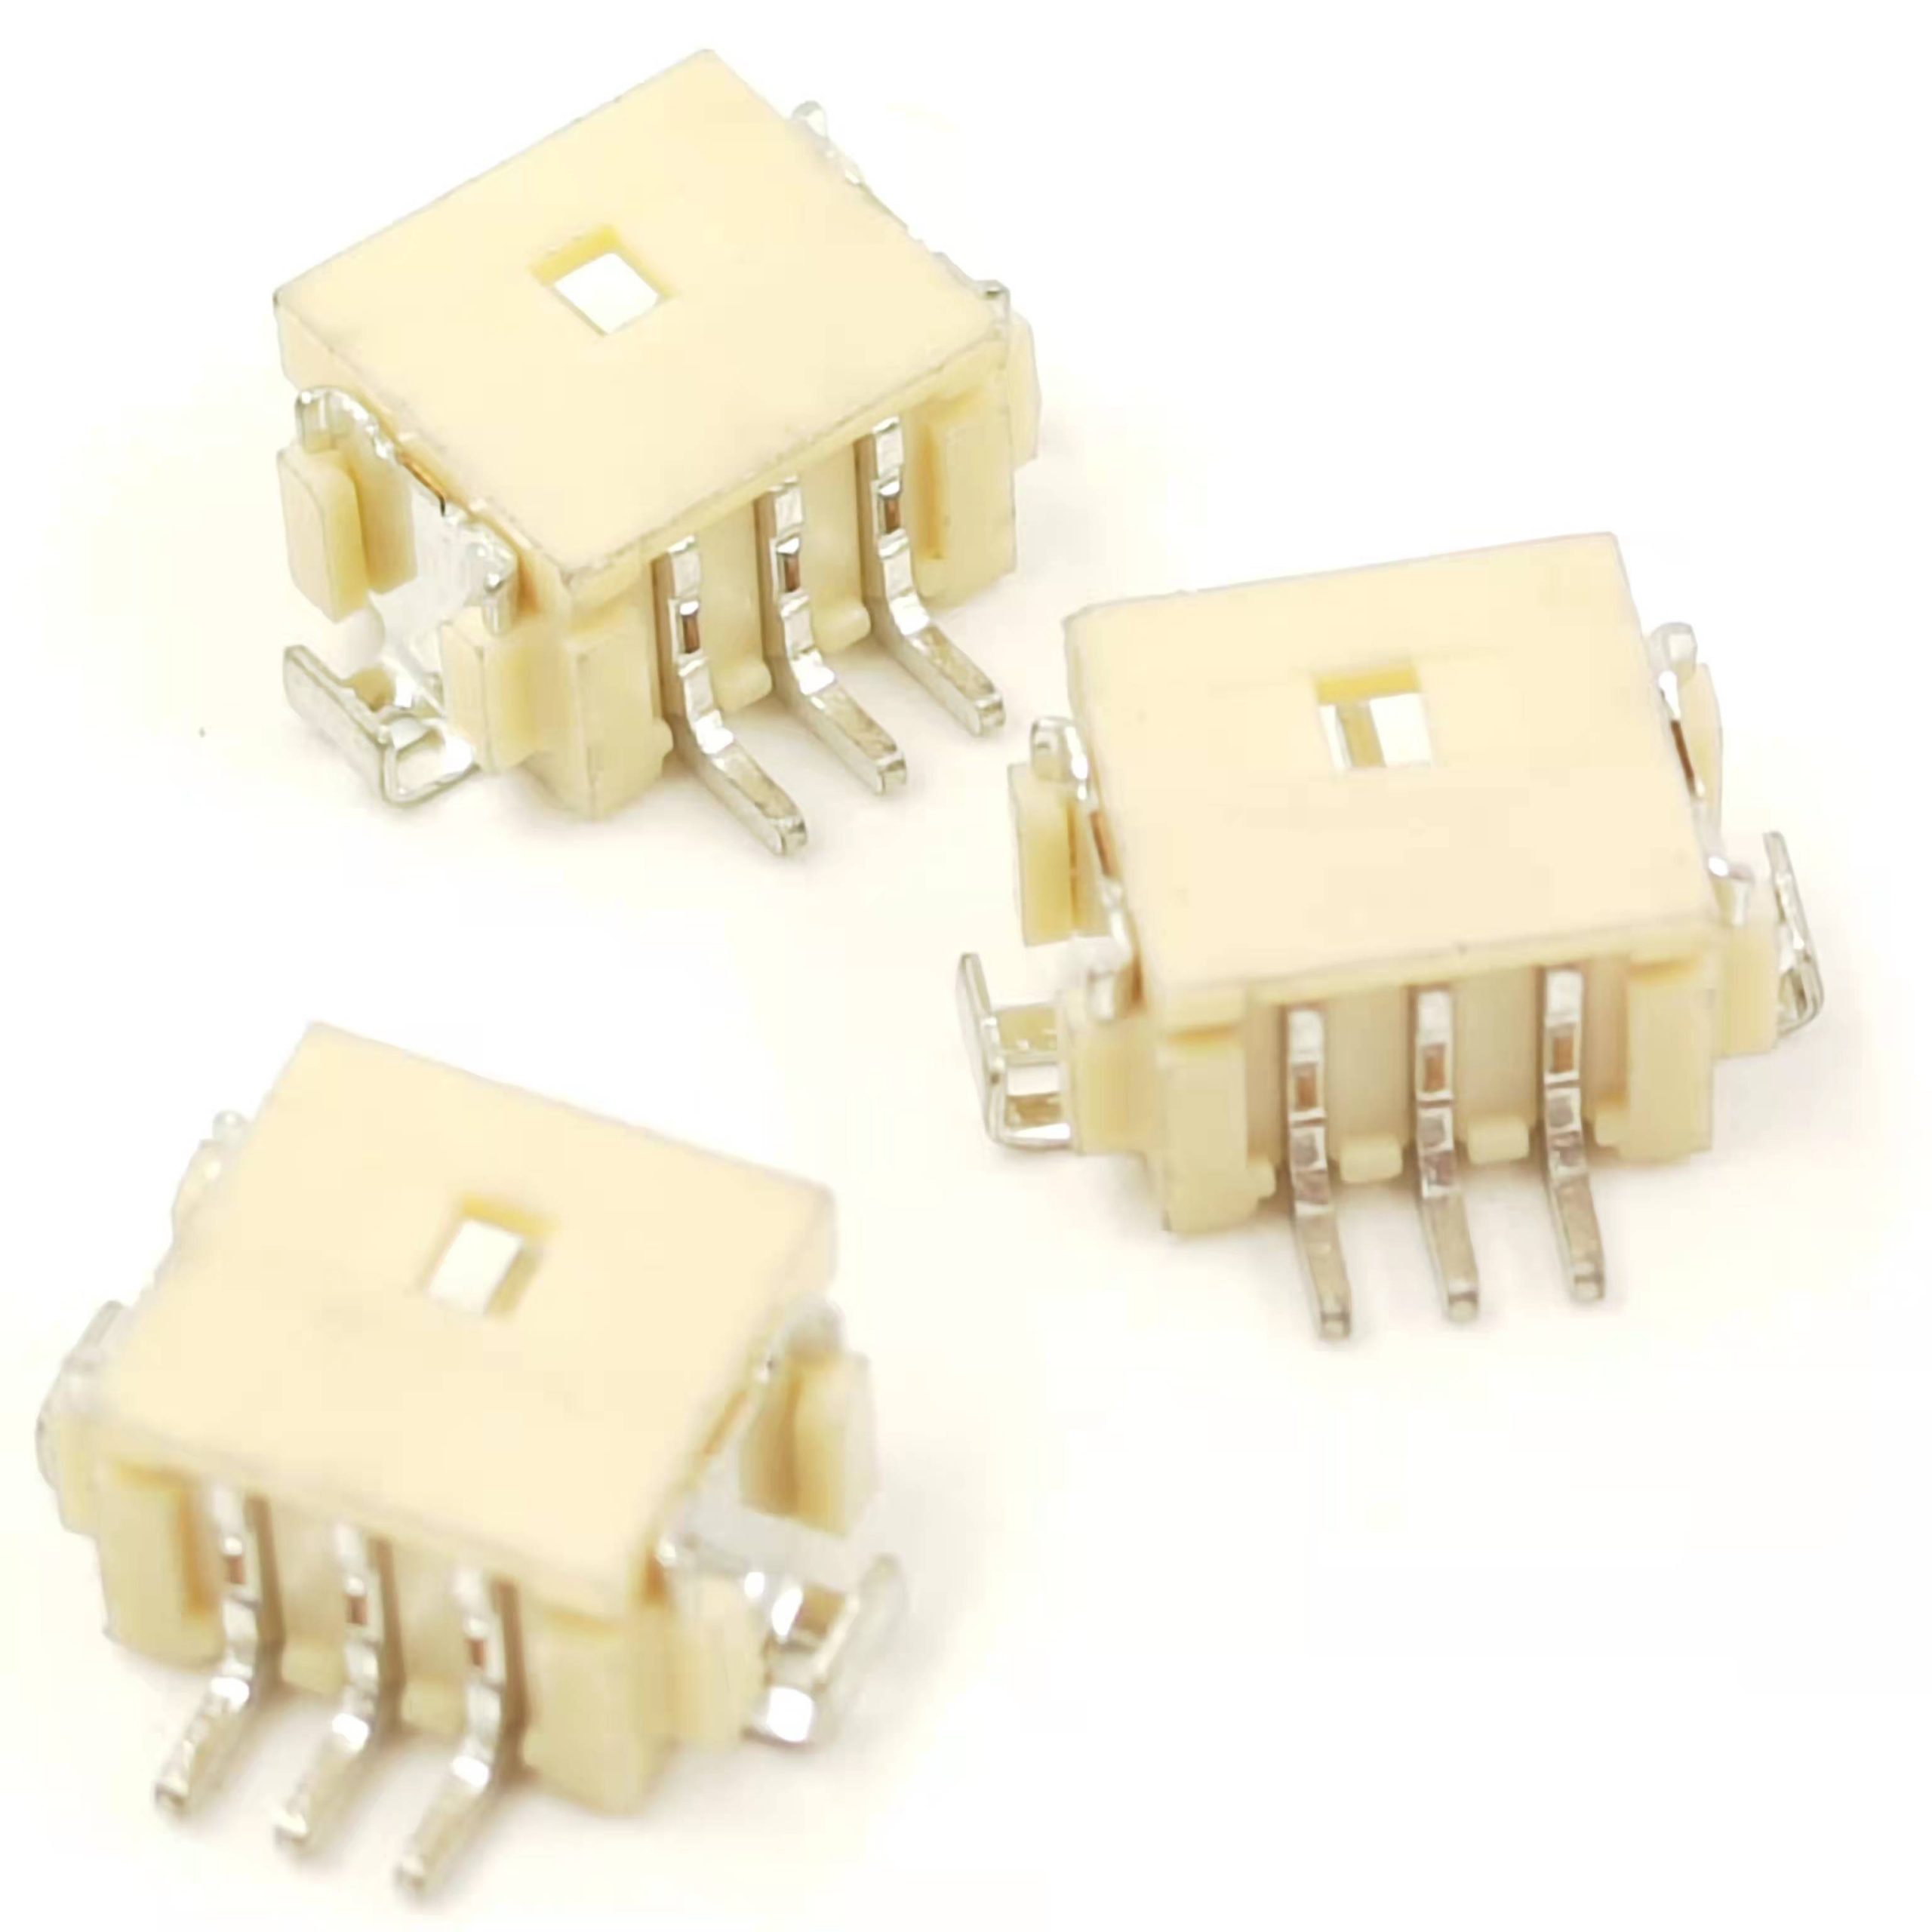 DF13A-3P-1.25H is a 3-pin board-to-wire connector with a 1.25mm pitch, designed for reliable and compact electrical connections in electronic applications. 